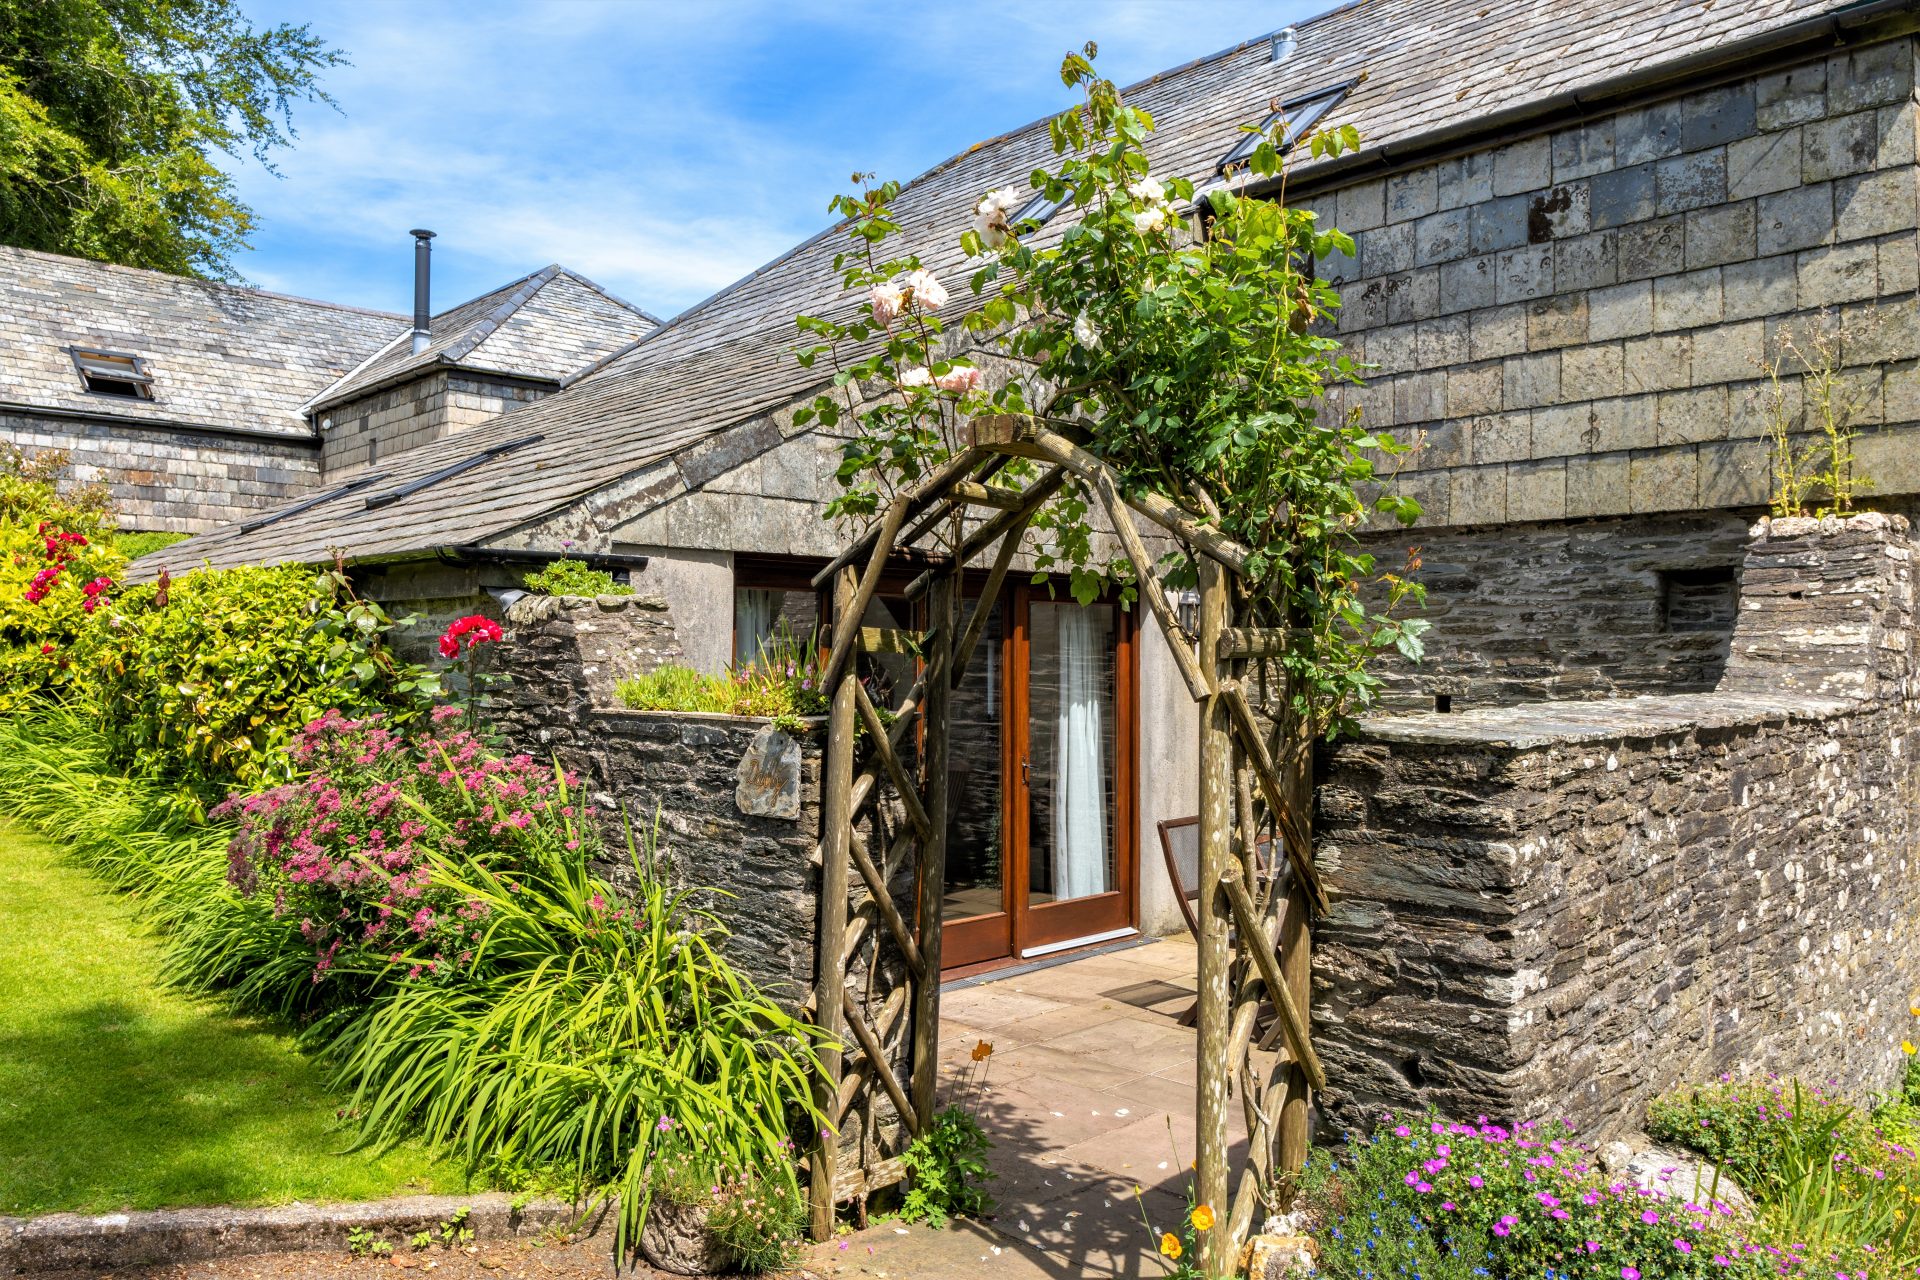 Dairy Cottage | 2 Bedrooms | Sleeps 4/5 |  From £160 per night | Pets